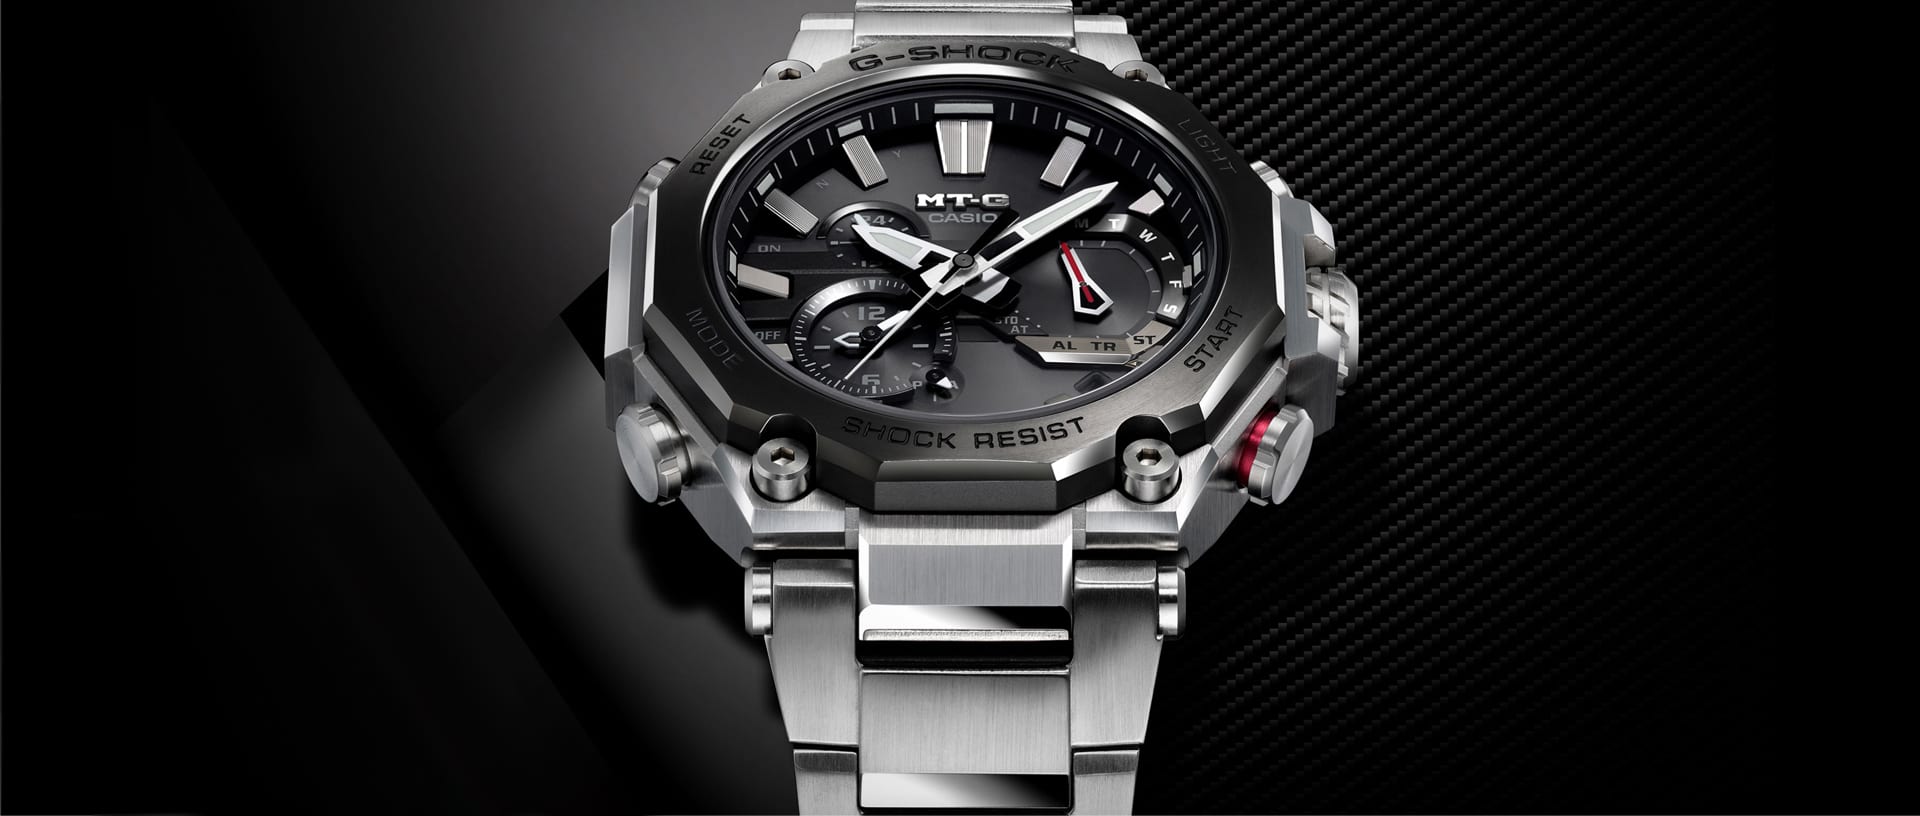 MTGB2000D silver G-SHOCK watch front view